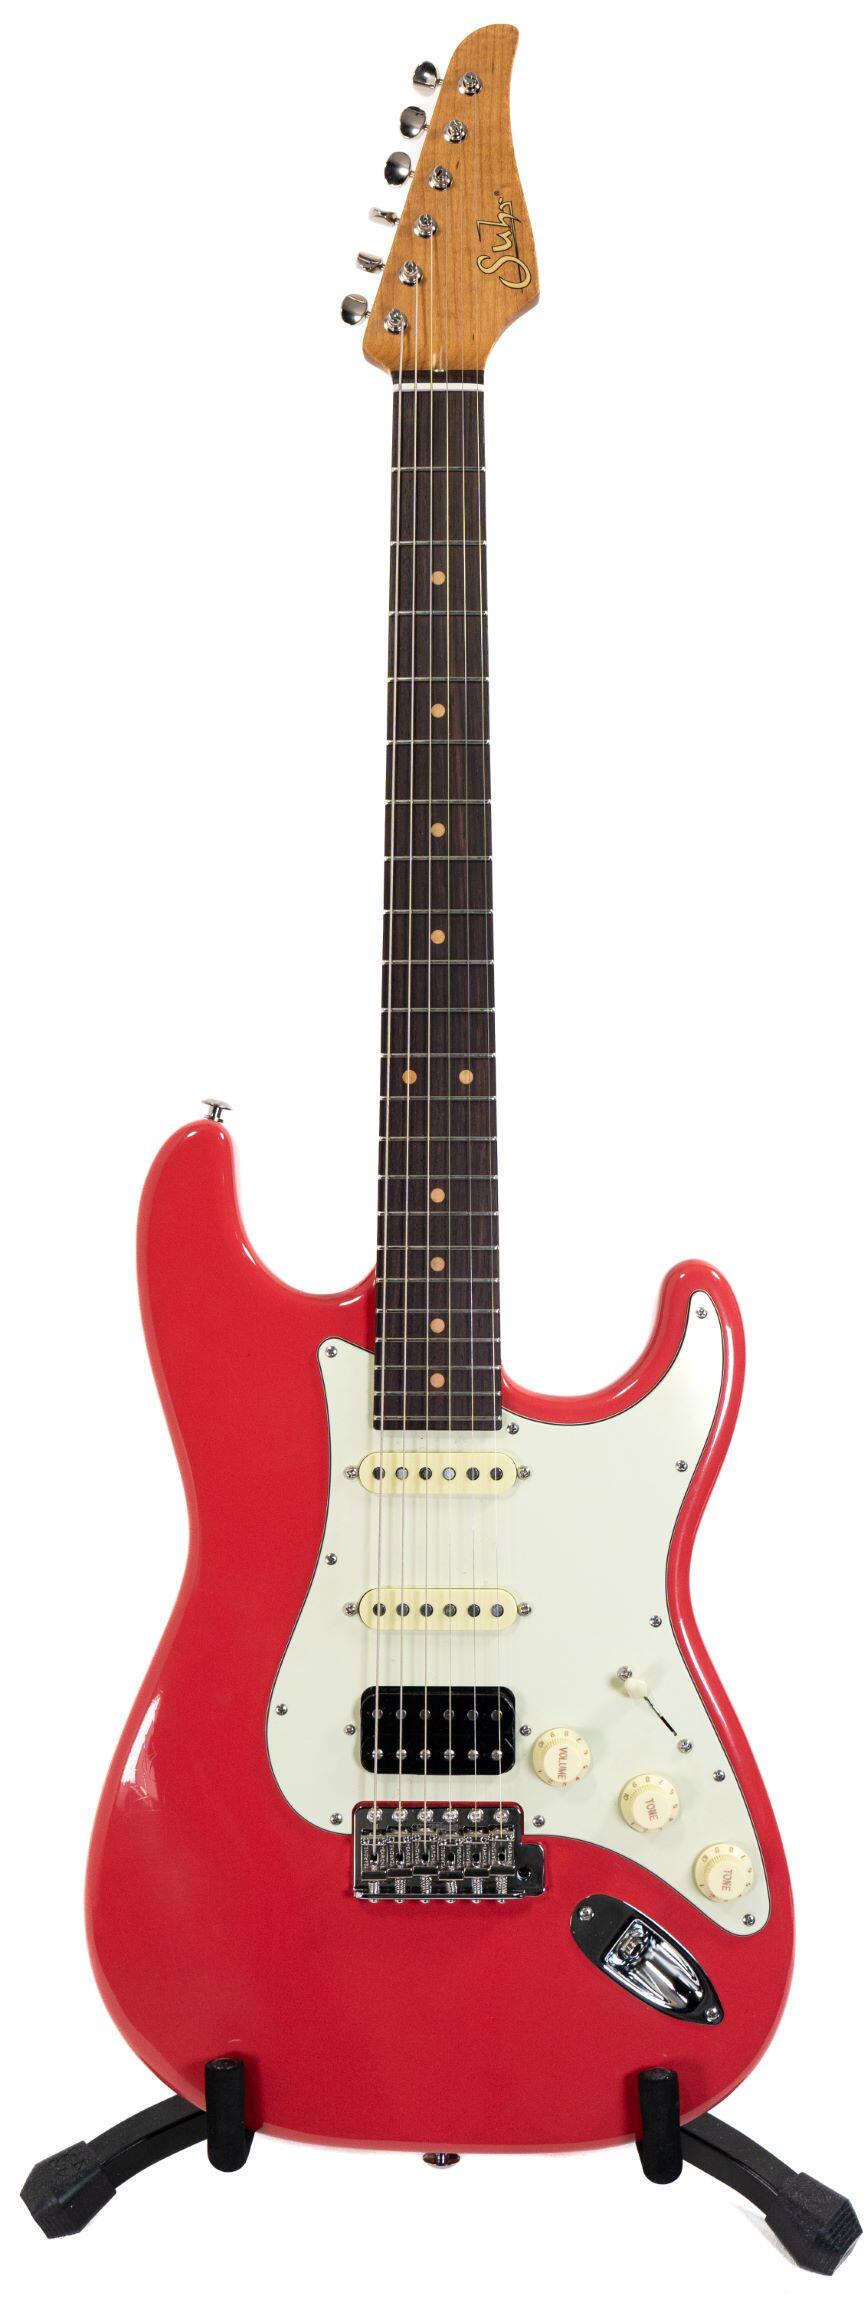 Suhr Guitars CLassic S Vintage Limited Edition, Fiesta Red : photo 1